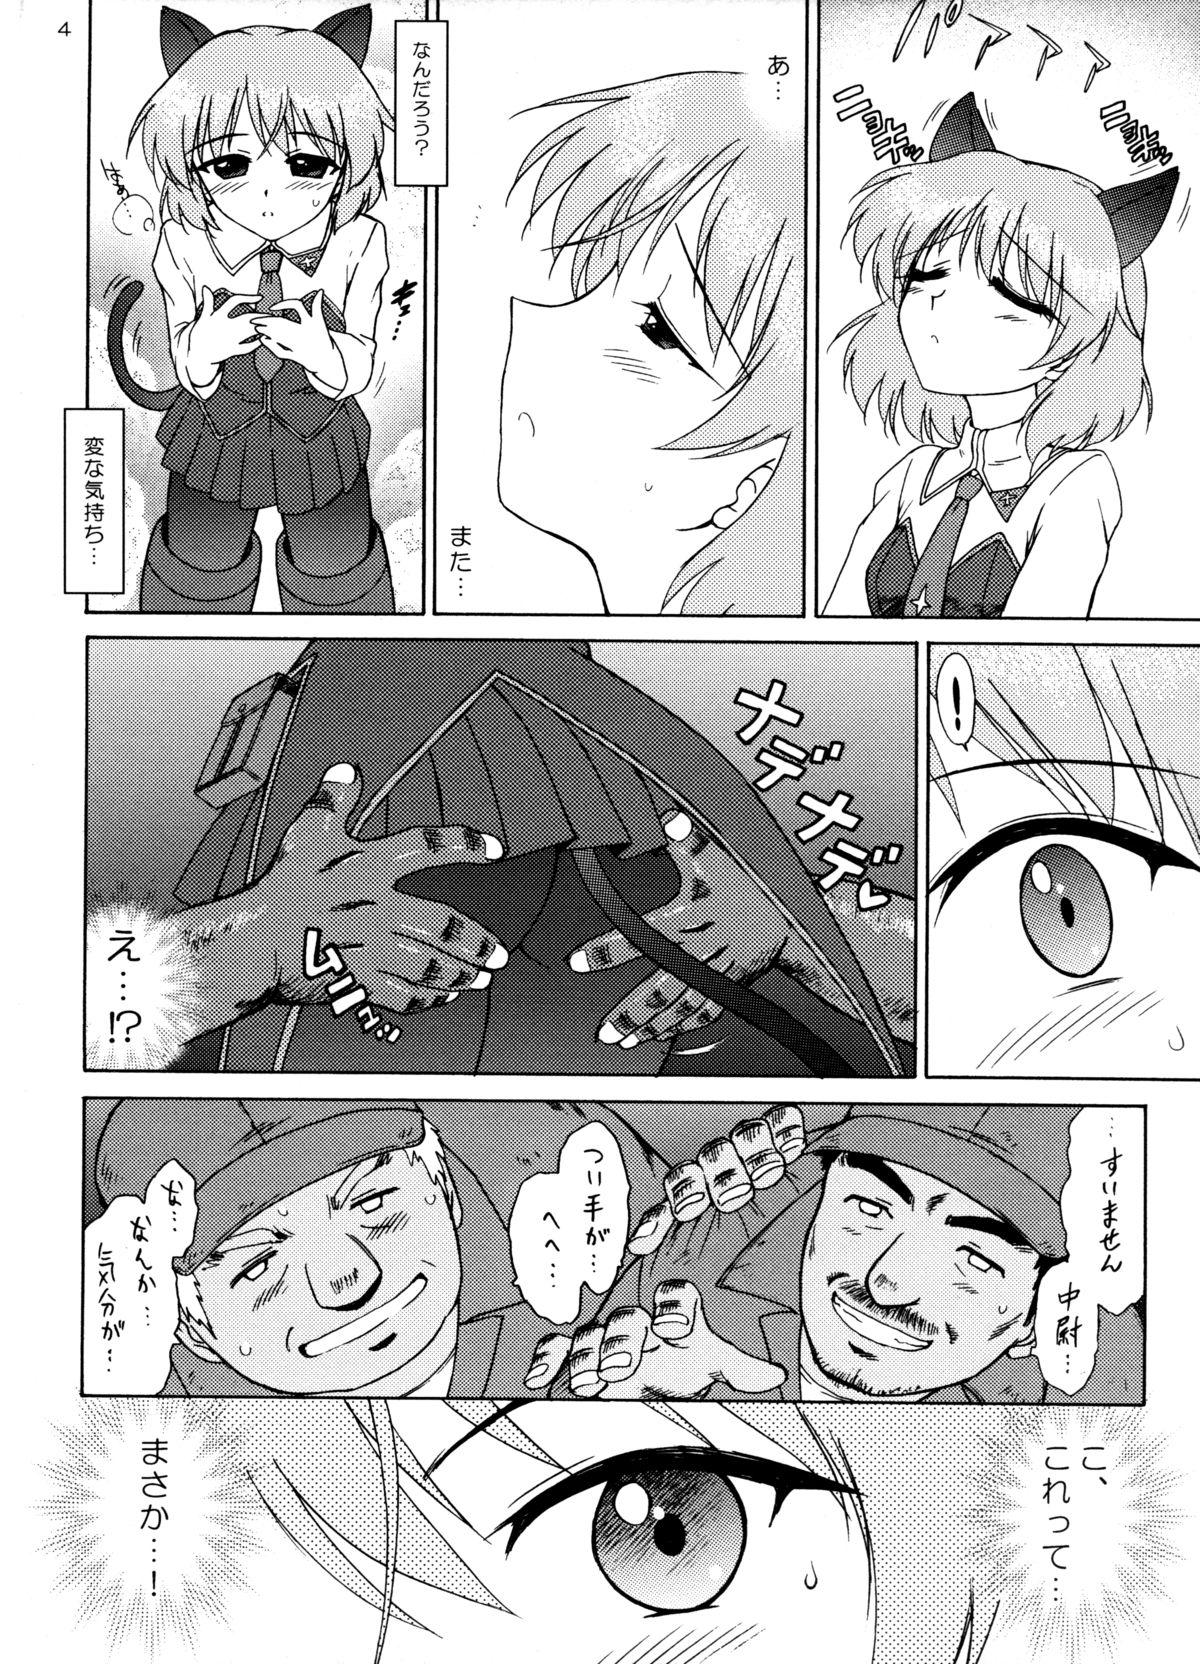 Latino SURVIVOR - Strike witches Squirting - Page 3